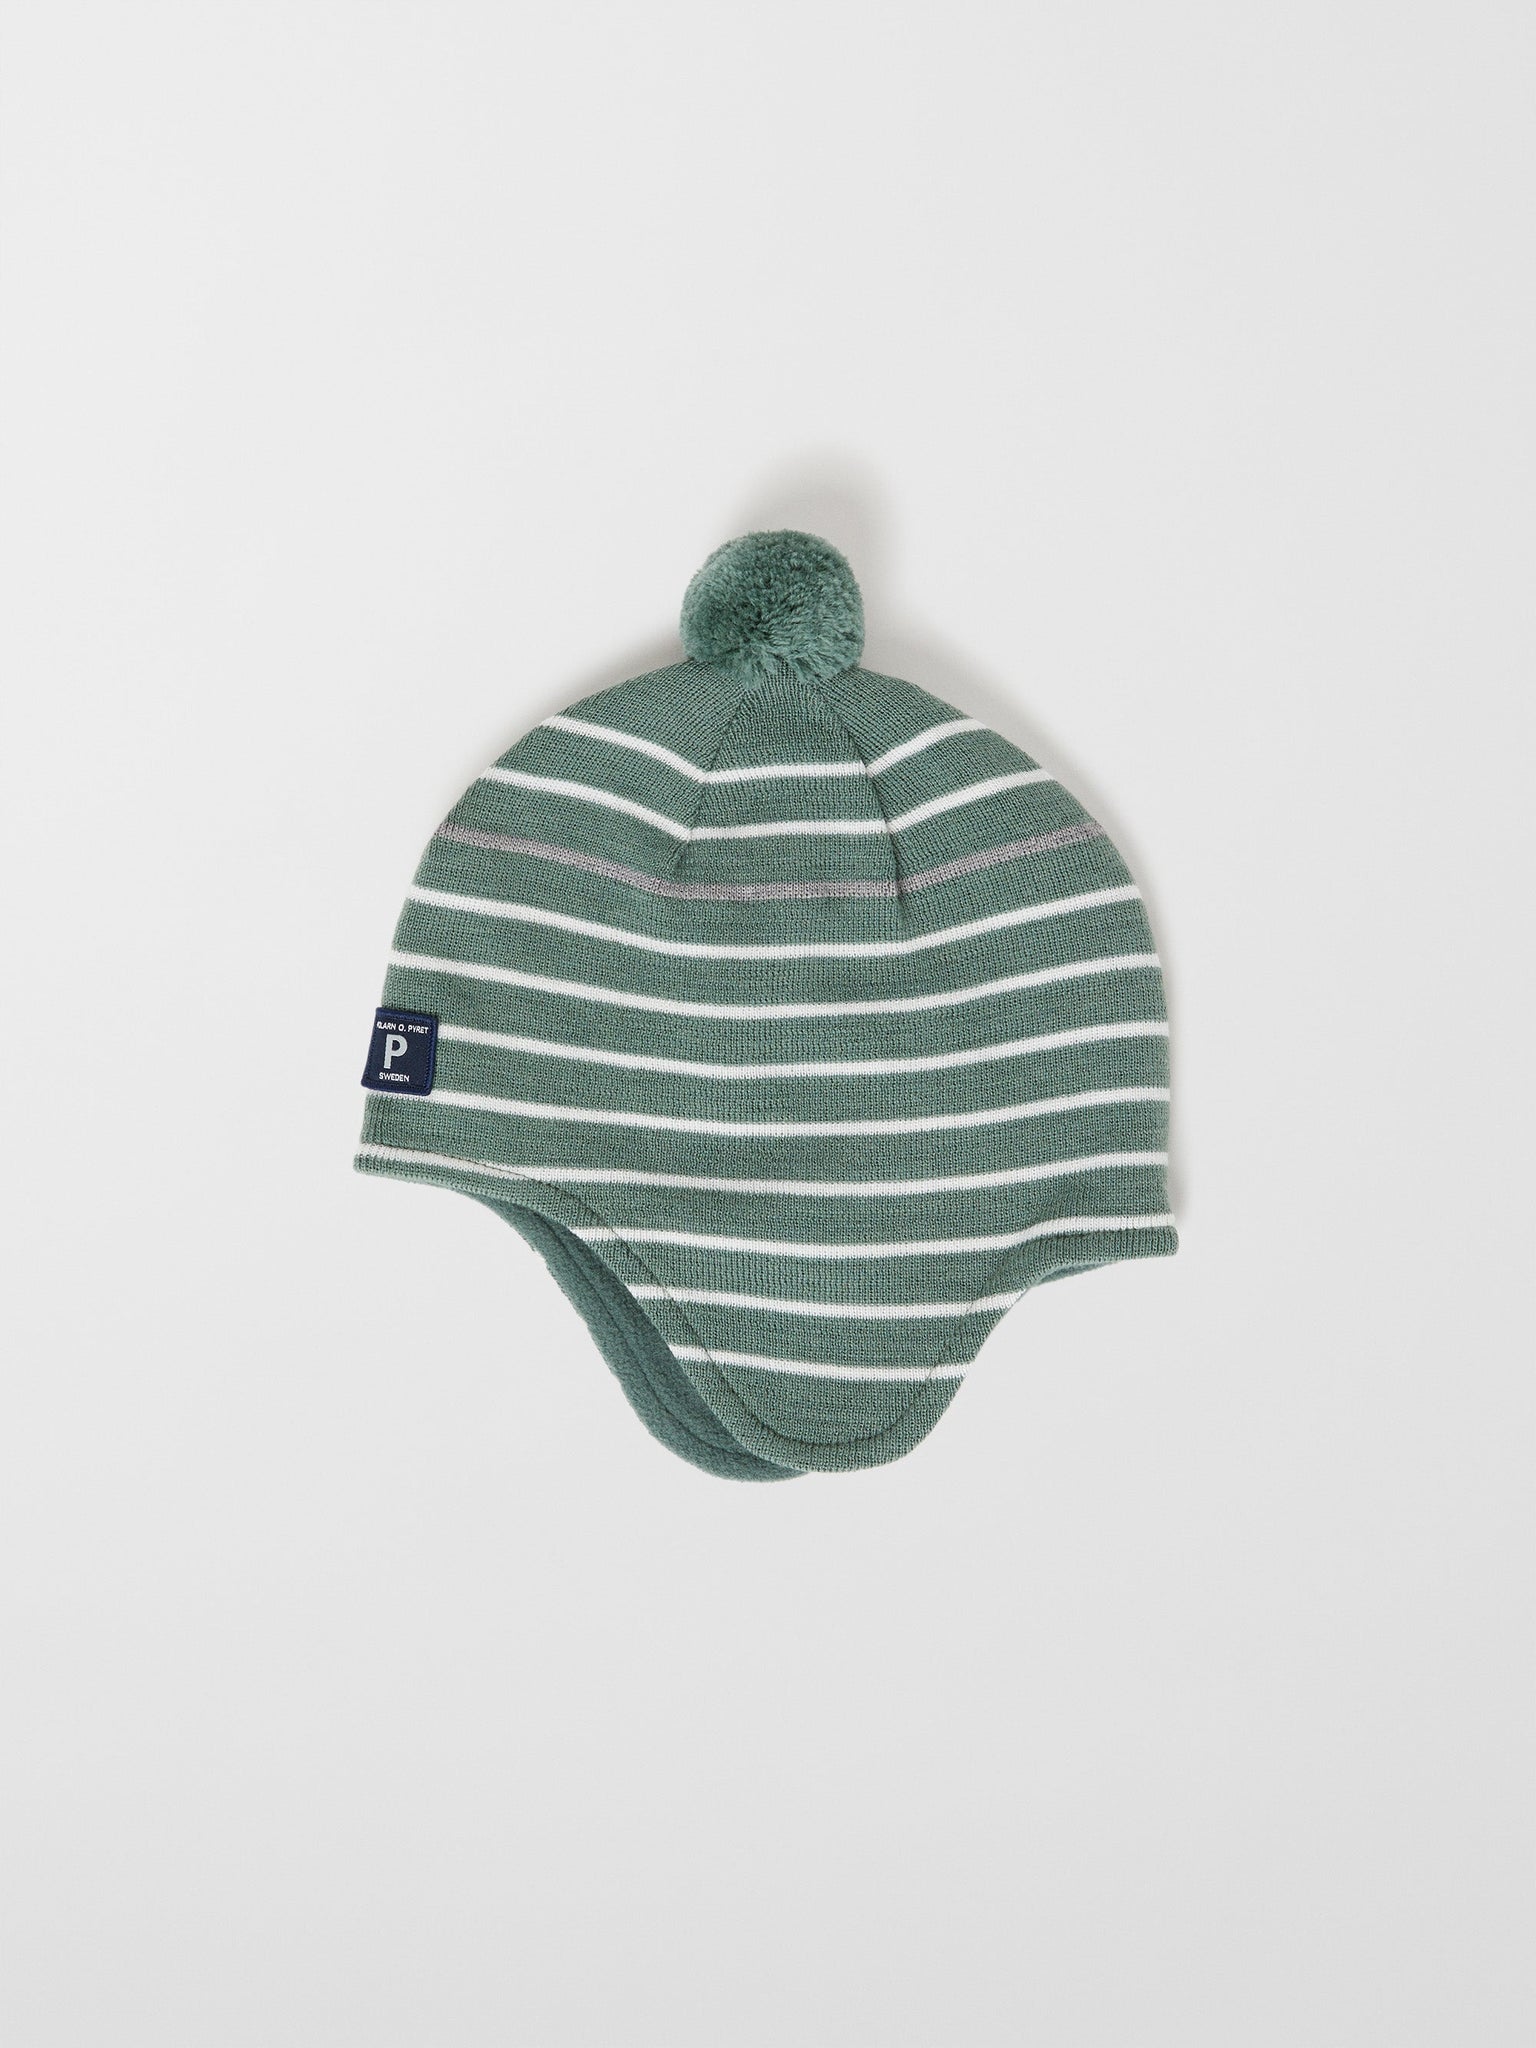 Merino Wool Green Kids Bobble Hat from the Polarn O. Pyret outerwear collection. The best ethical kids outerwear.